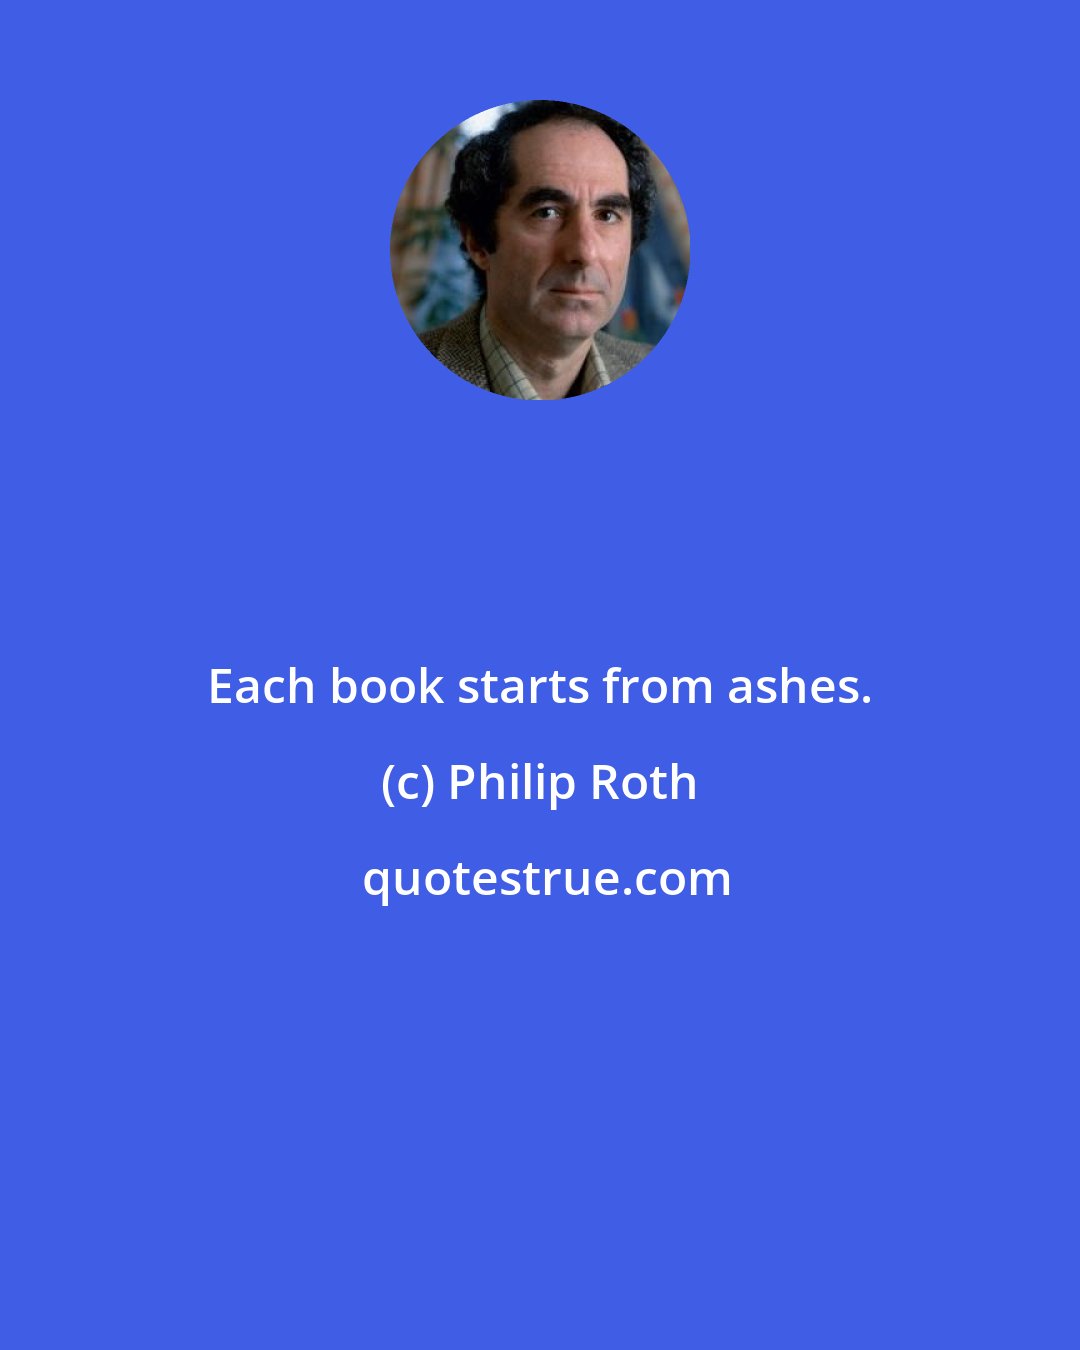 Philip Roth: Each book starts from ashes.